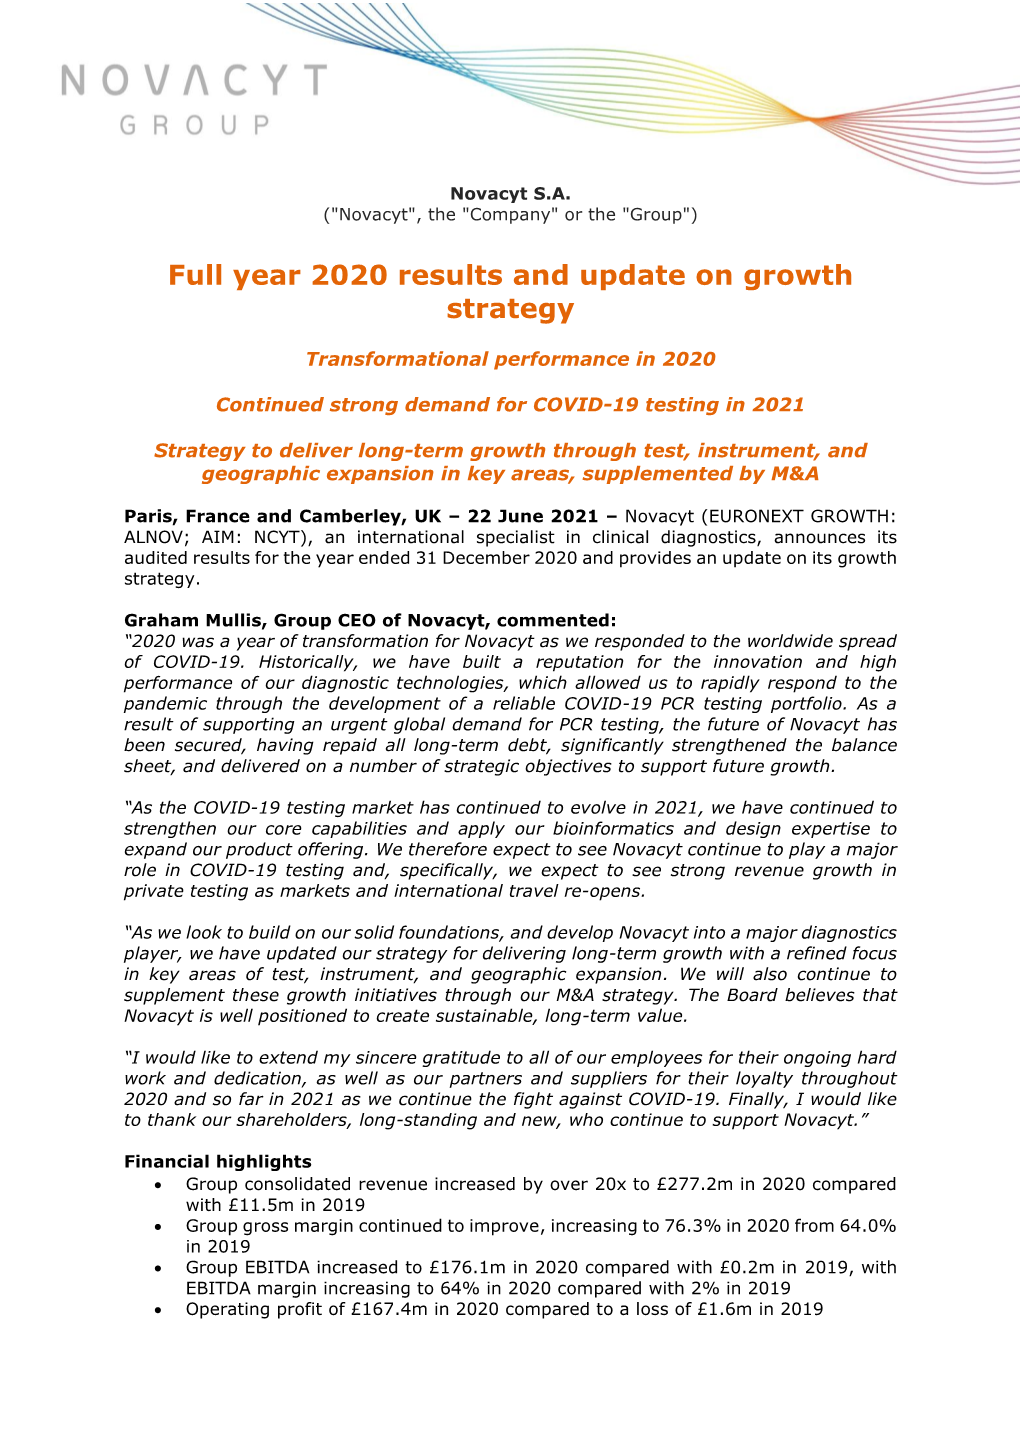 Full Year 2020 Results and Update on Growth Strategy